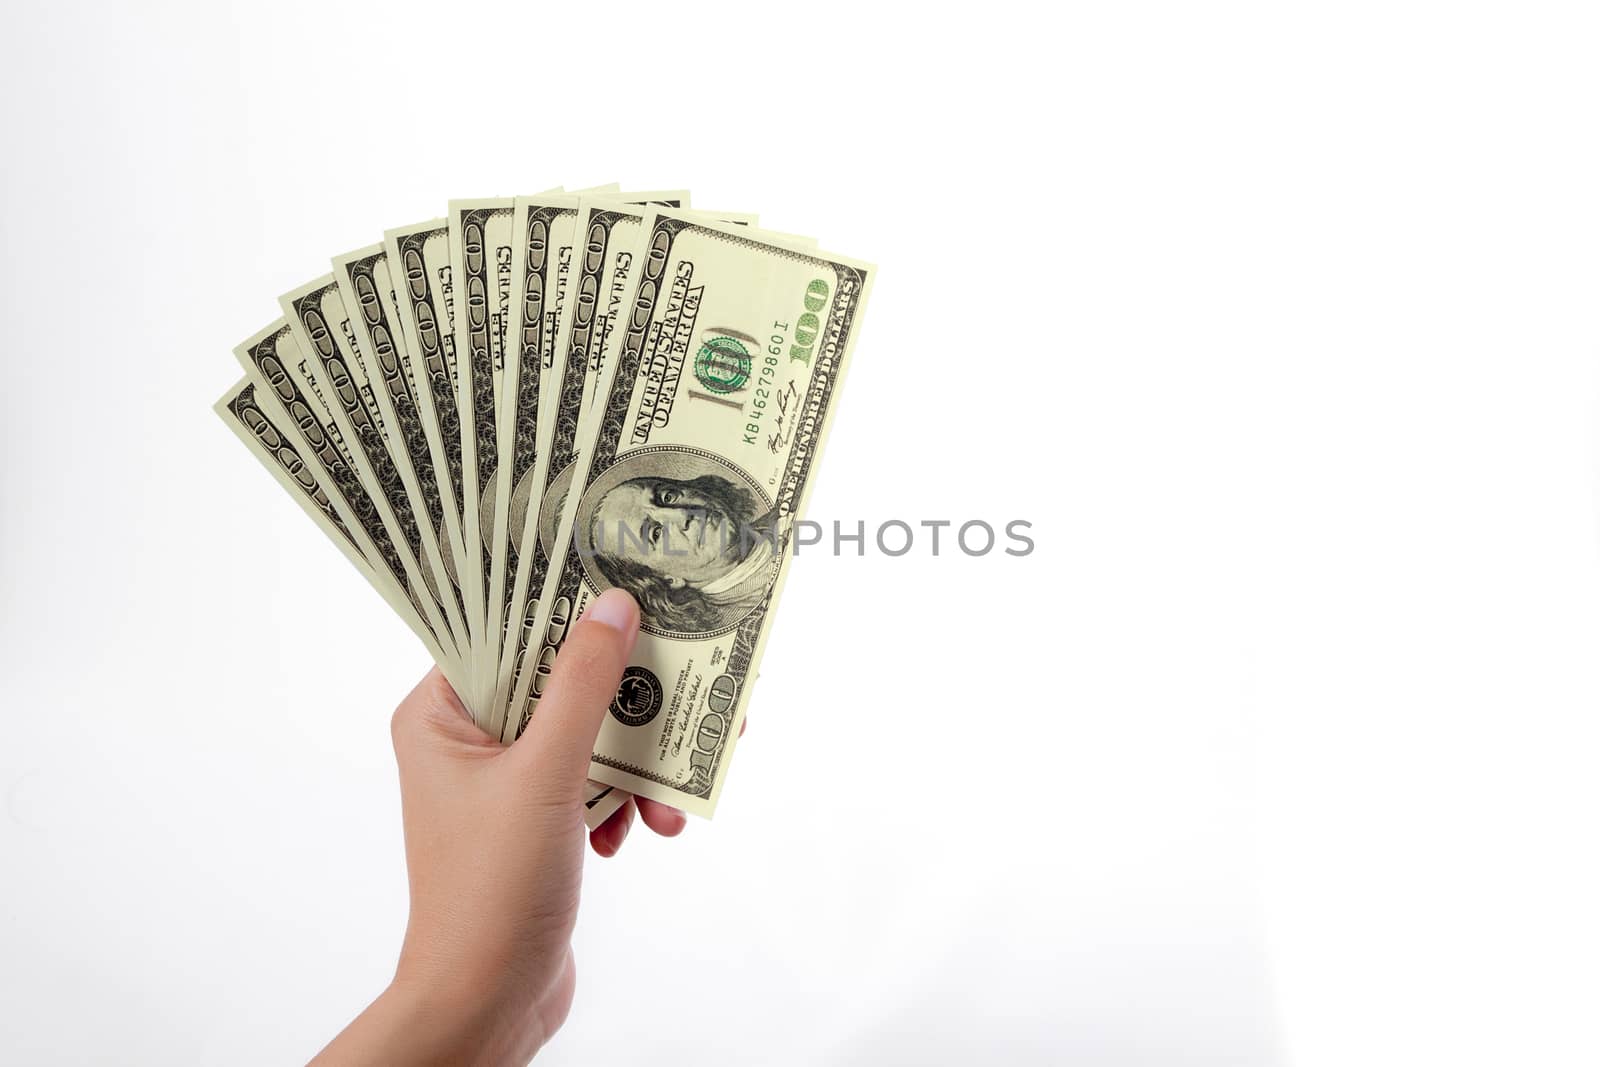 woman hand with one hundred dollars banknote isolated on a white background with clipping path